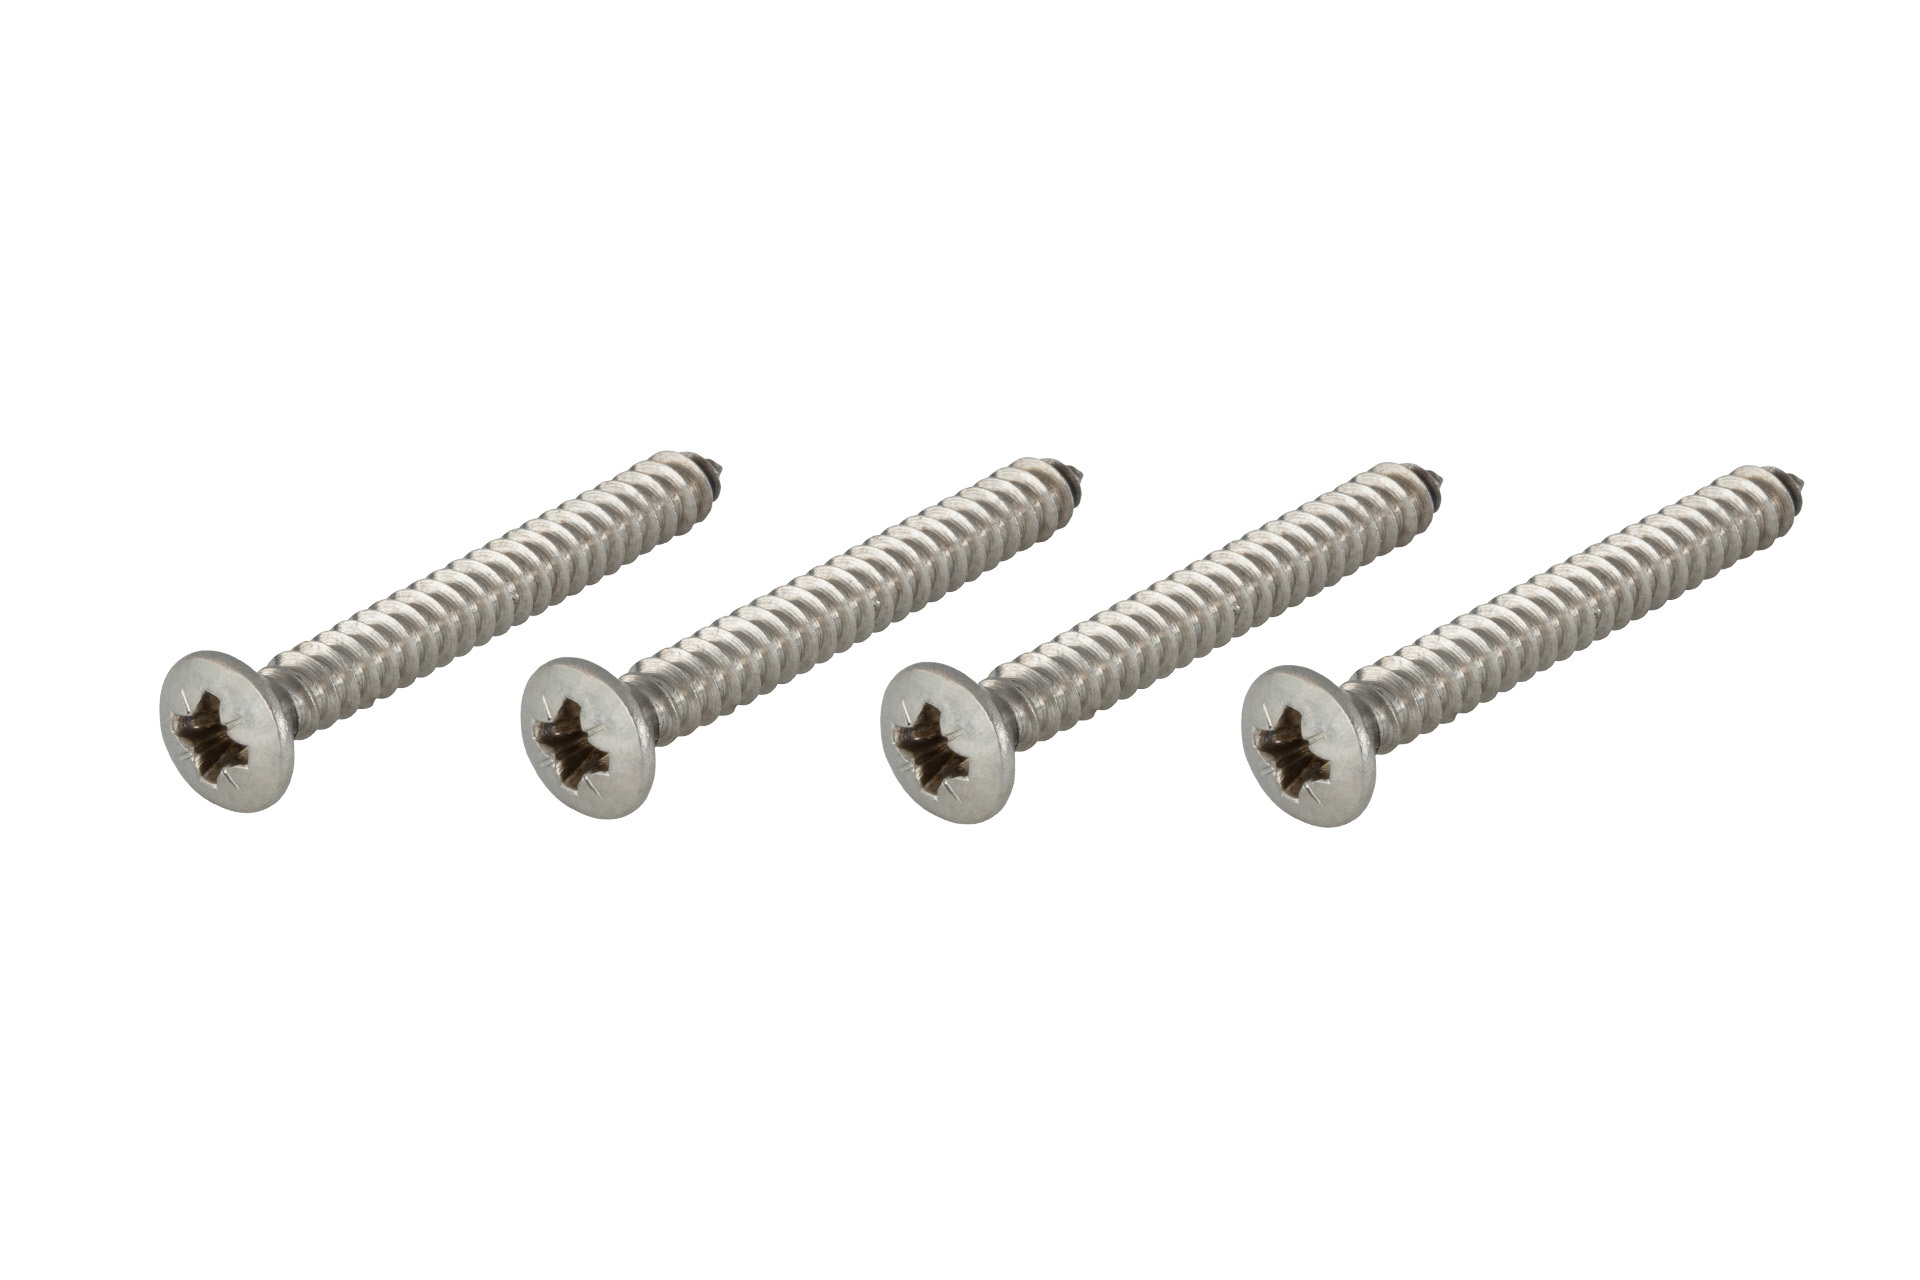 Framus & Warwick Parts - Countersunk Long Screw for Bolt-On Neck, 4,2 mm x 38 mm, 4 pcs. - Stainless Steel